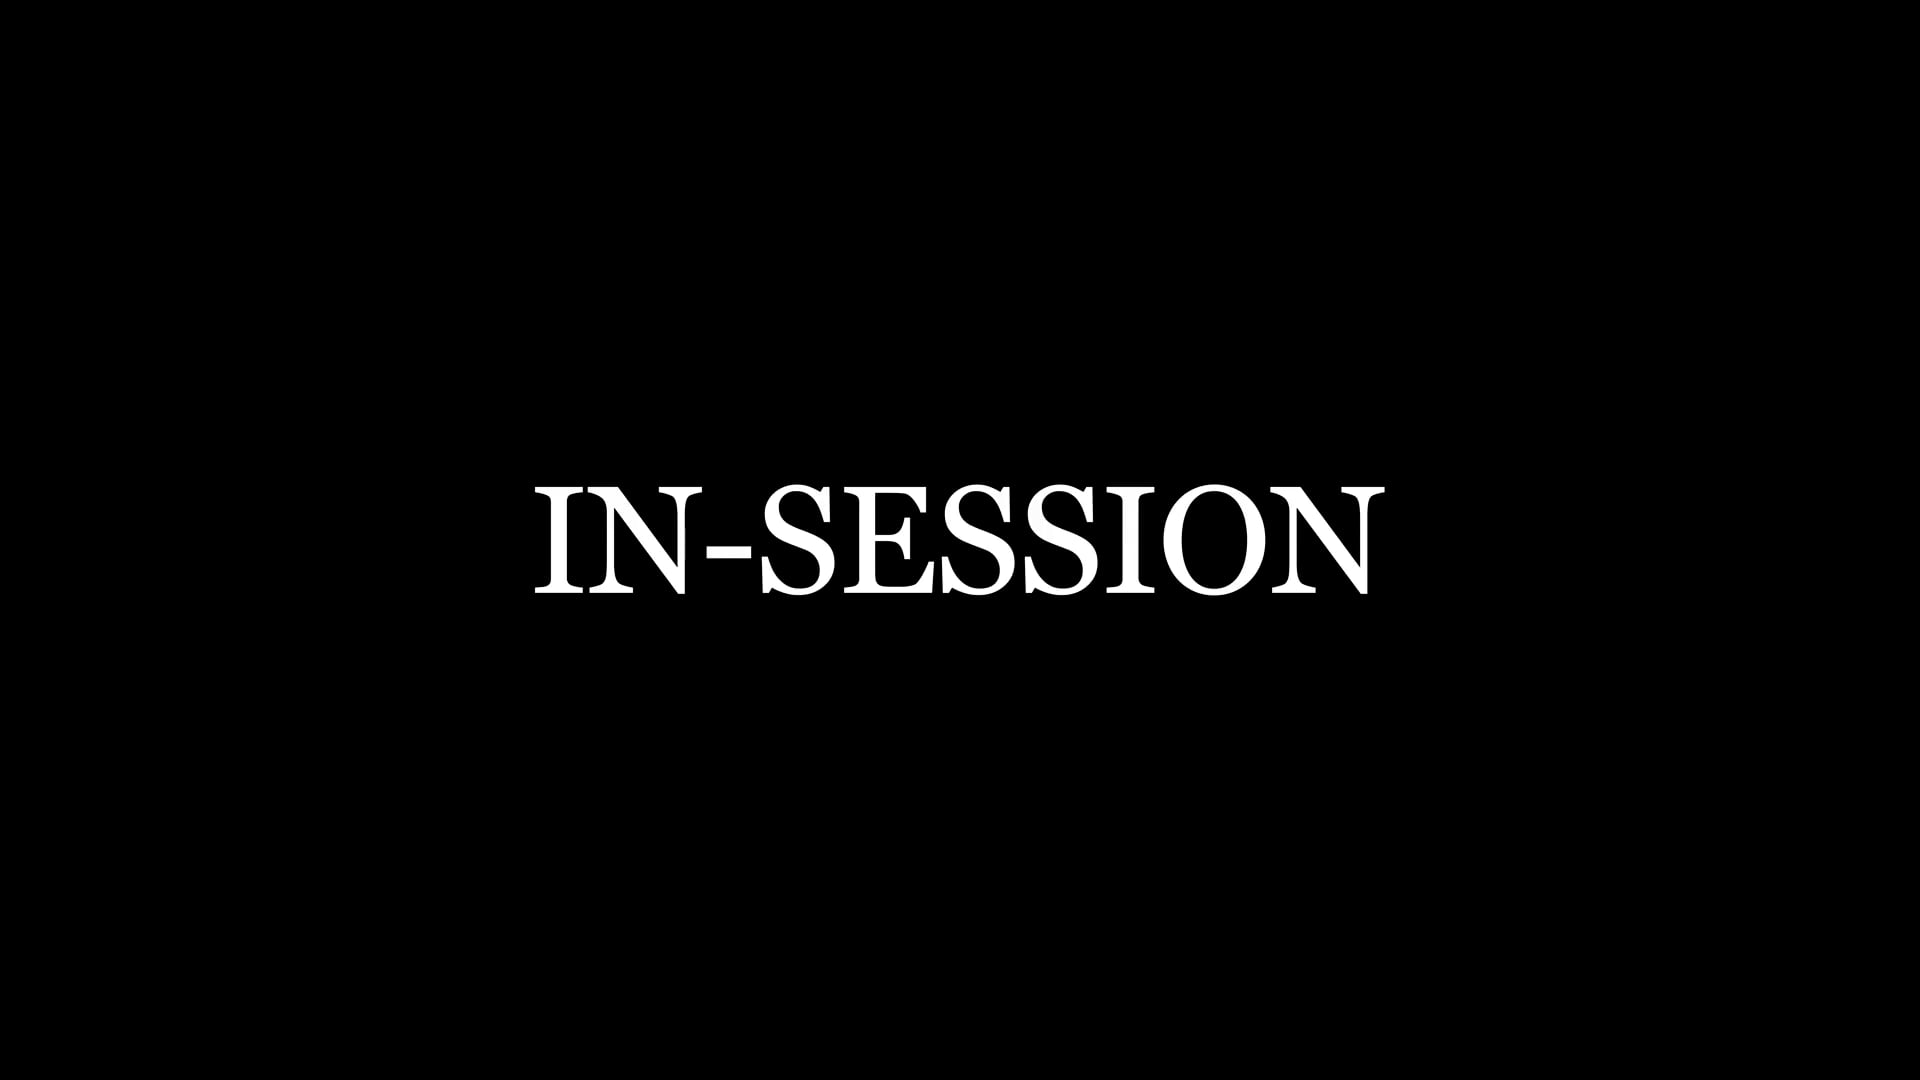 IN-SESSION